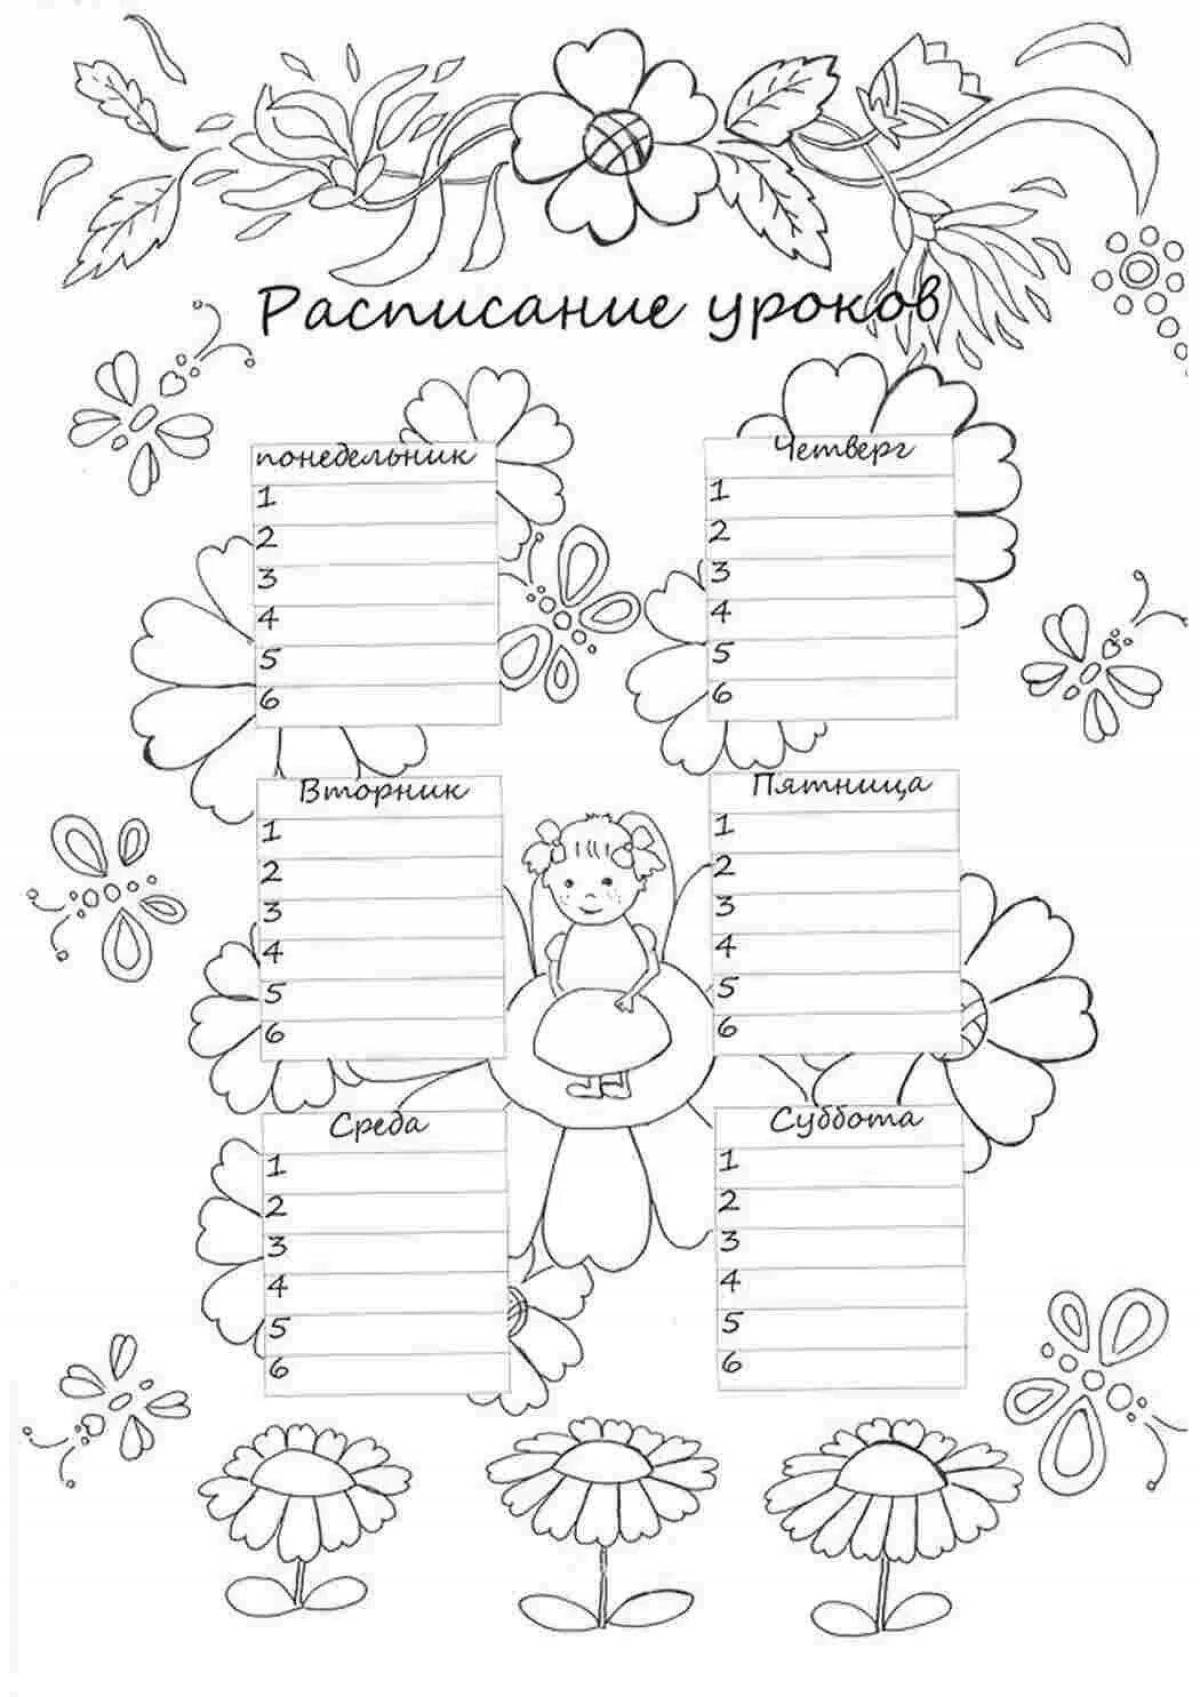 Coloring routine template for elementary school students